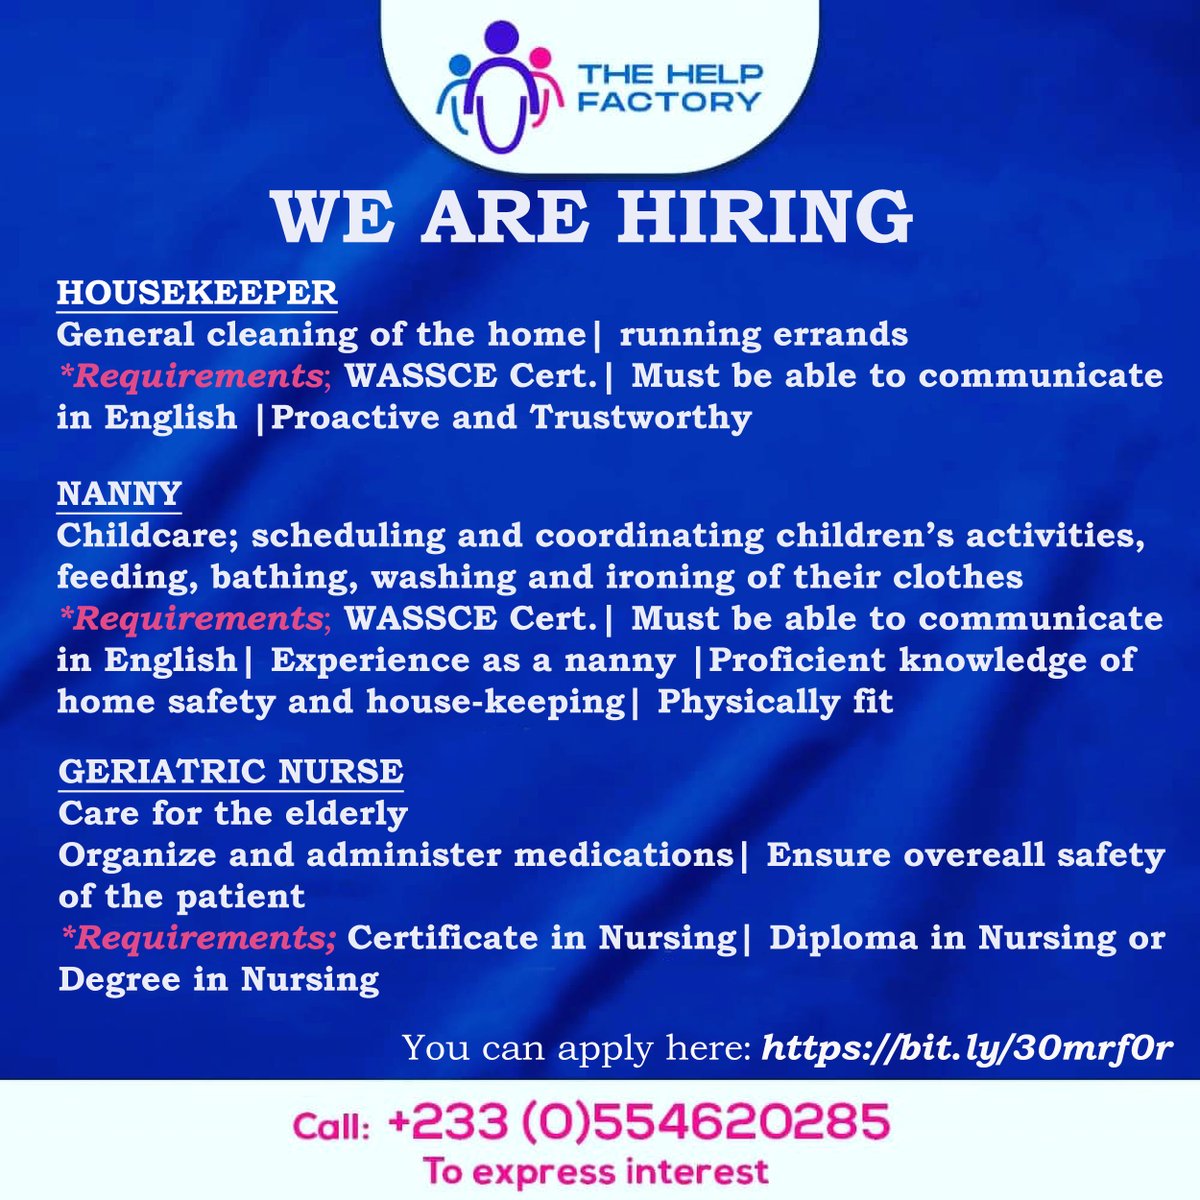 A retruitment company is hiring applicants capable of roles such as housekeepers, nannies and geriatric nurses, iterested applicants can complete their forms online via bit.ly/30mrf0r